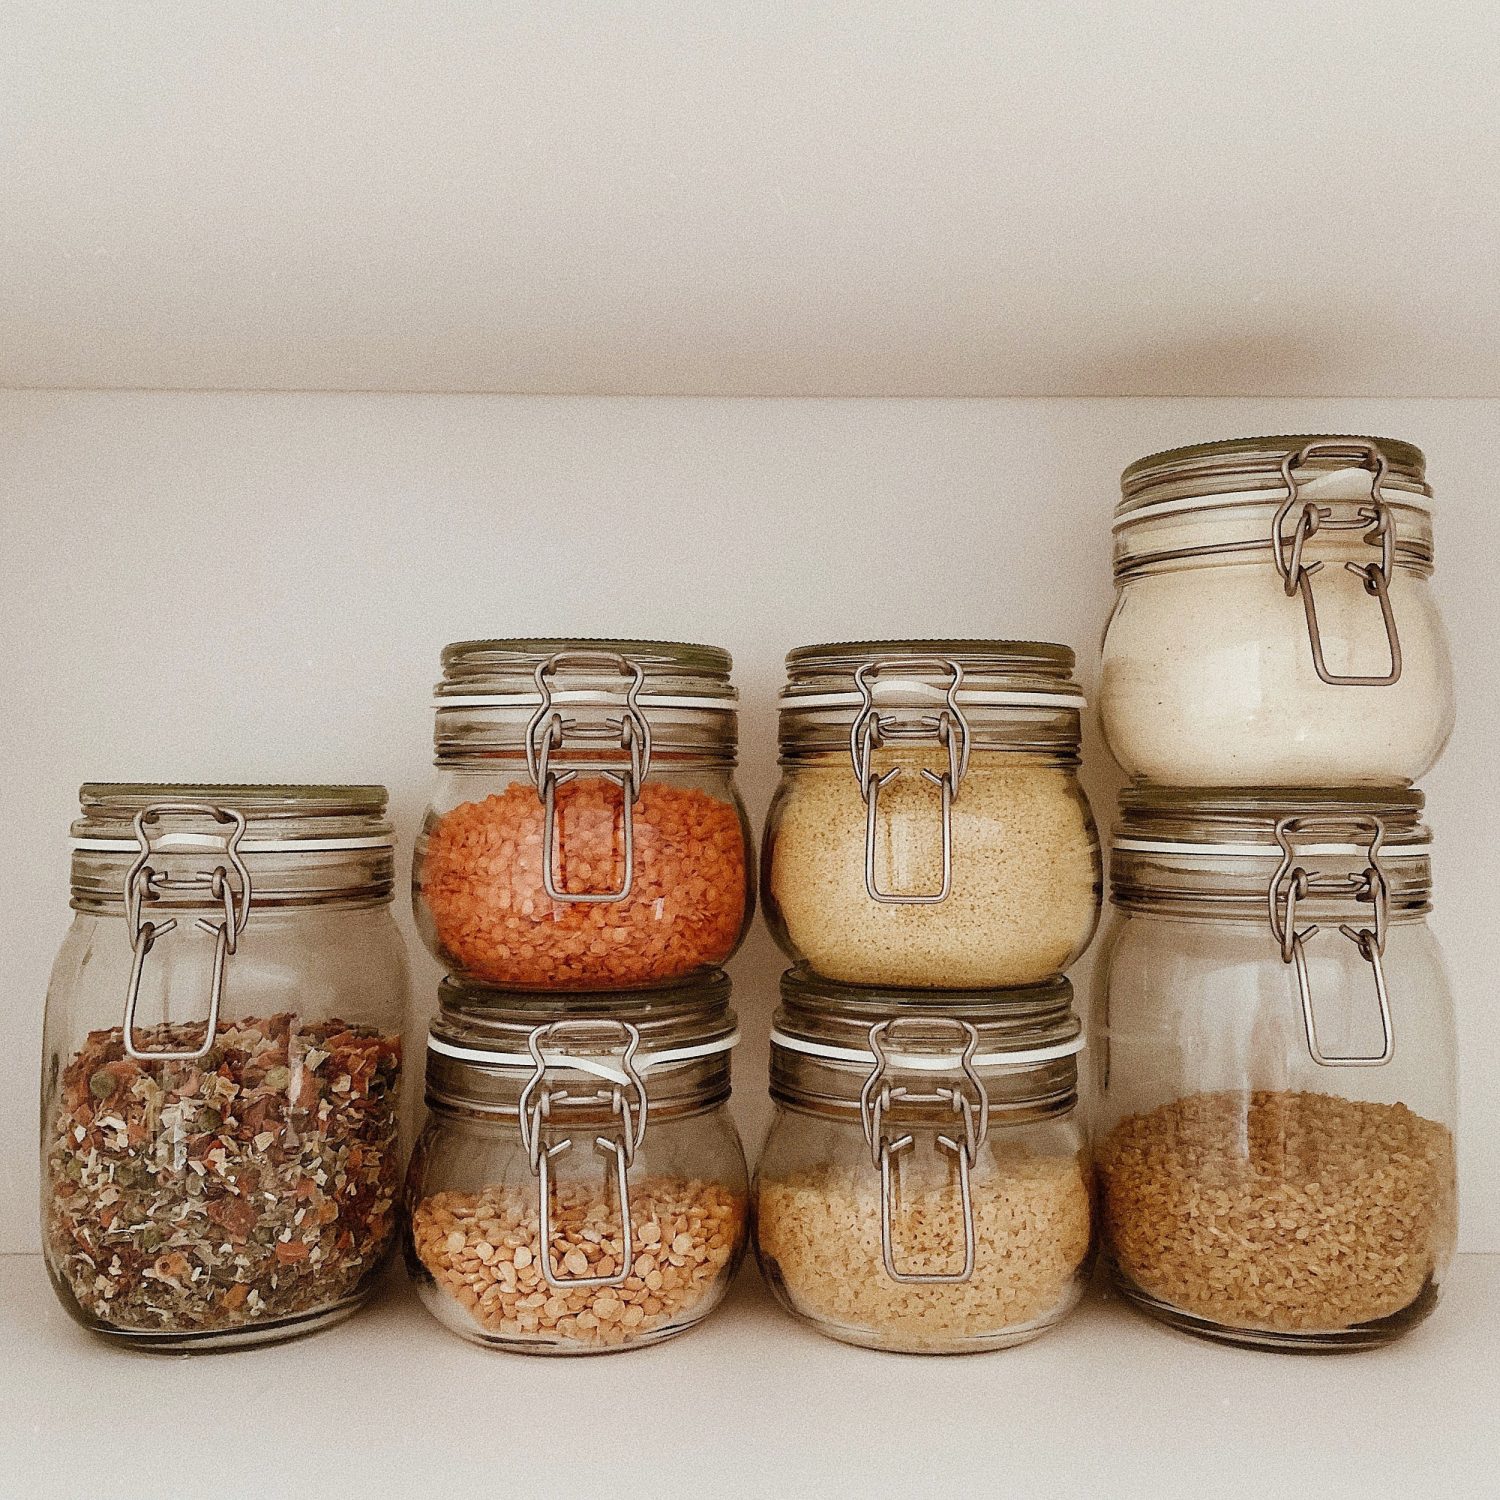 5 Tips to Maintain Your Organized Pantry